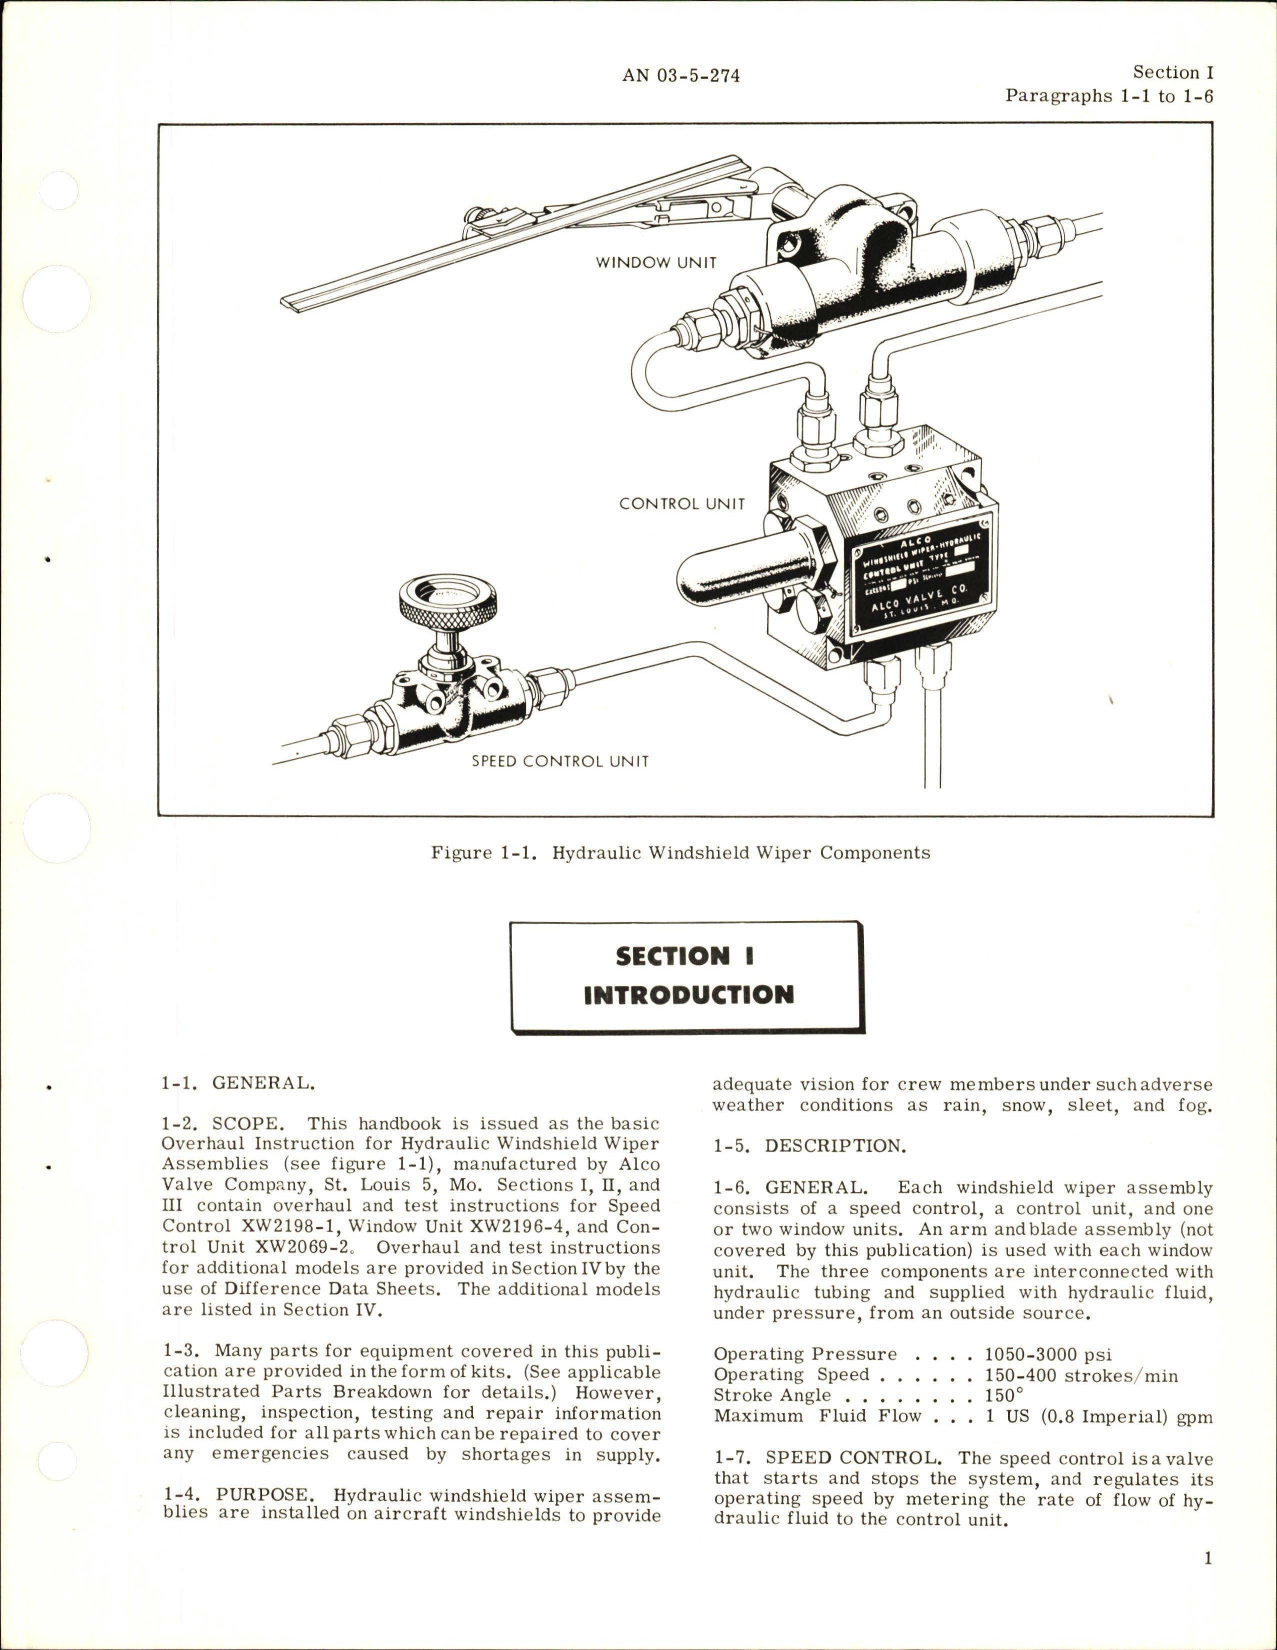 Sample page 5 from AirCorps Library document: Overhaul Instructions for Hydraulic Windshield Wiper Systems Components 